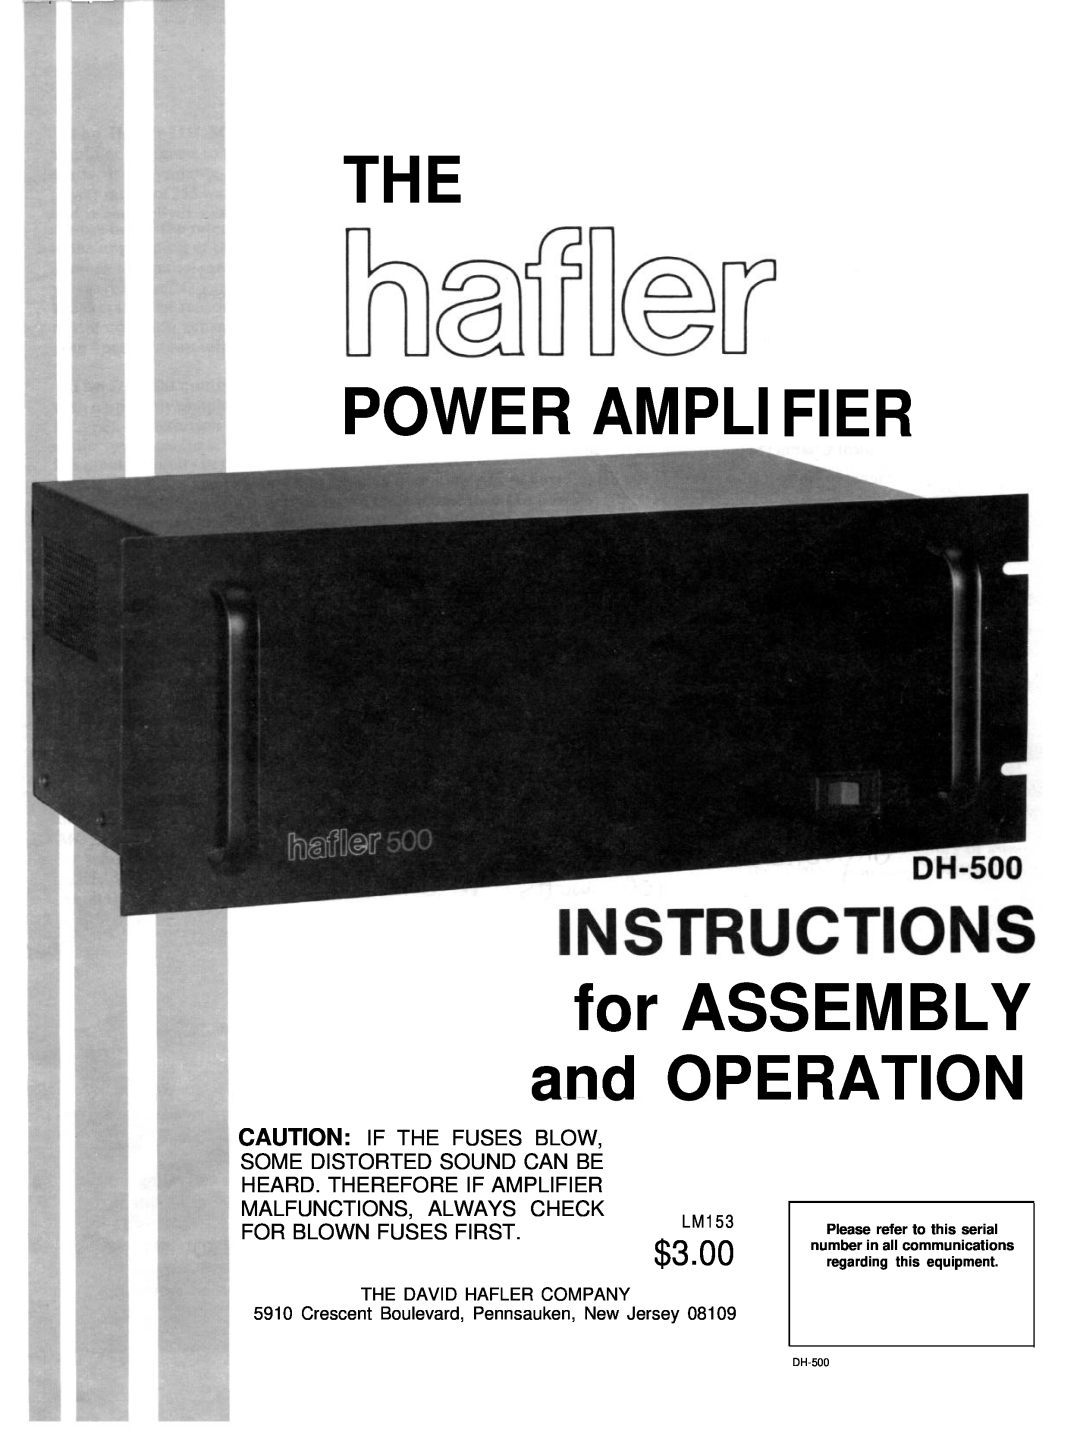 Hafler DH-500 manual Caution If The Fuses Blow, Some Distorted Sound Can Be, Heard. Therefore If Amplifier, and OPERATION 